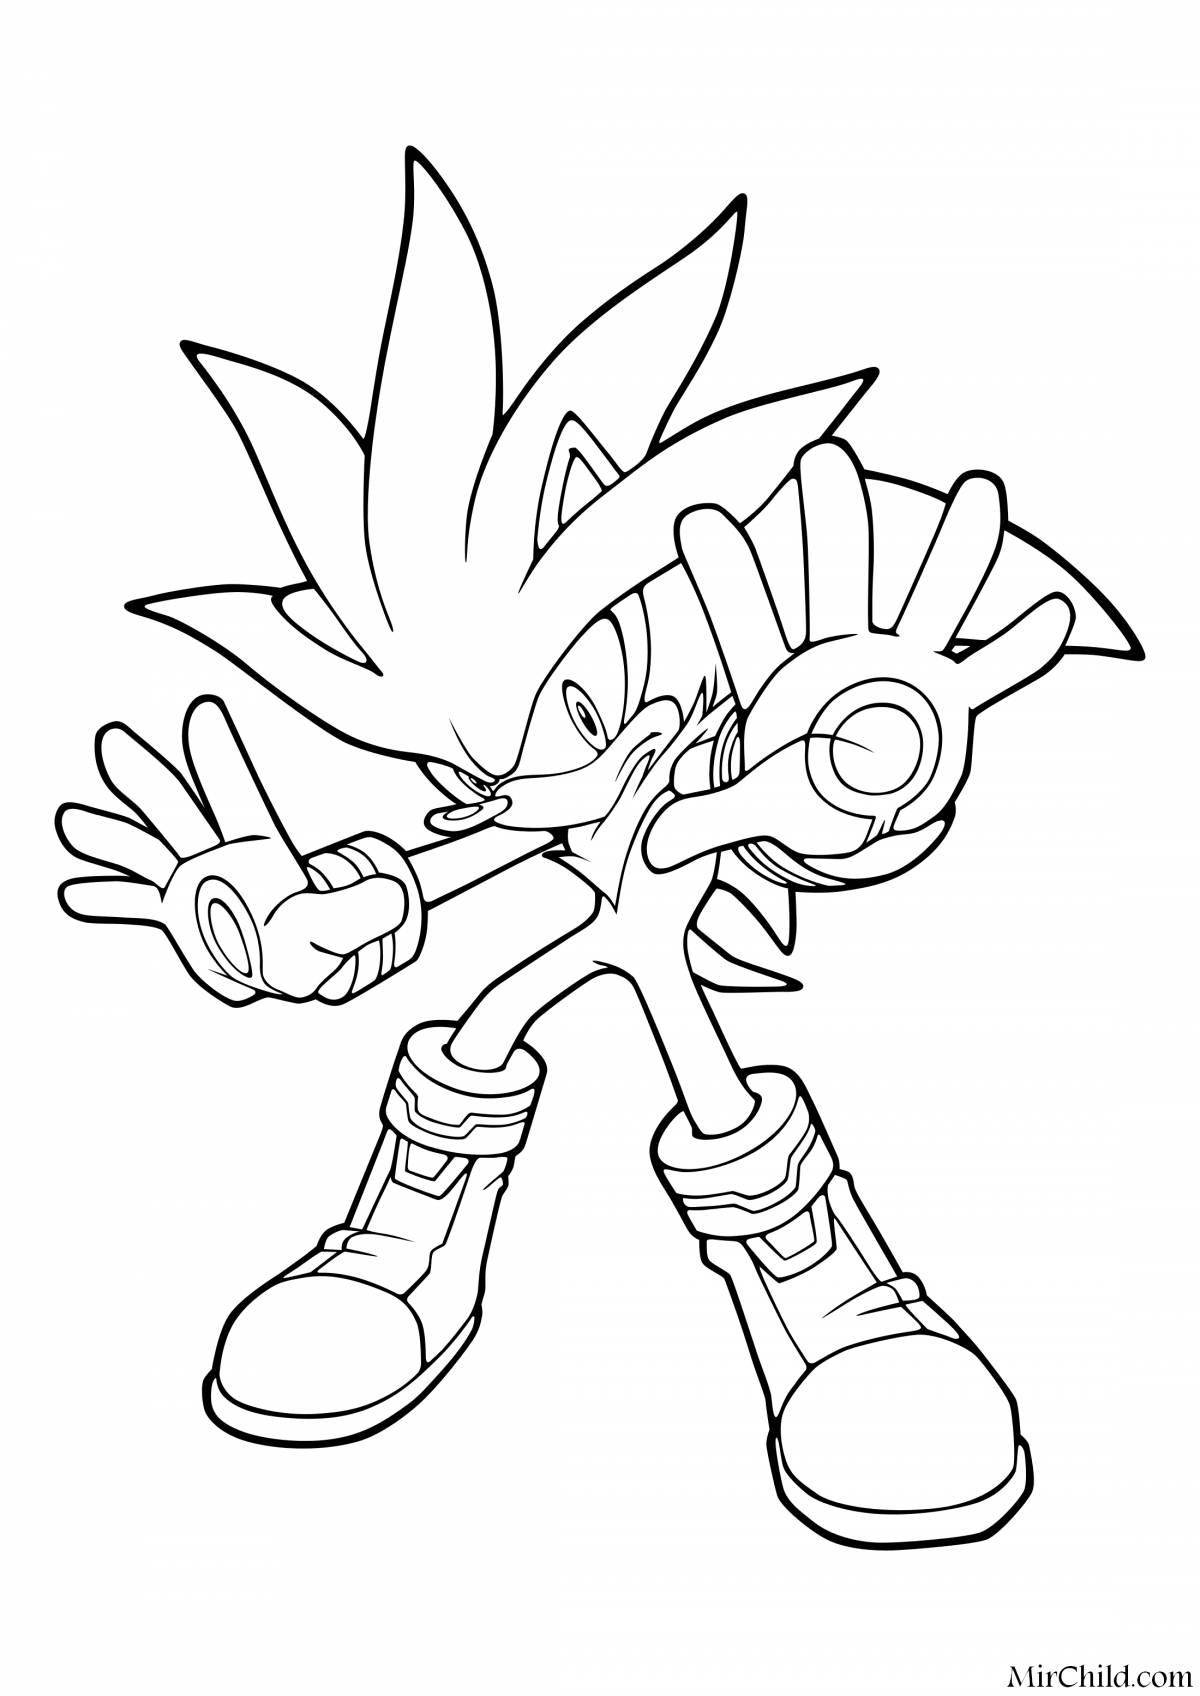 Great sonic the hedgehog coloring book